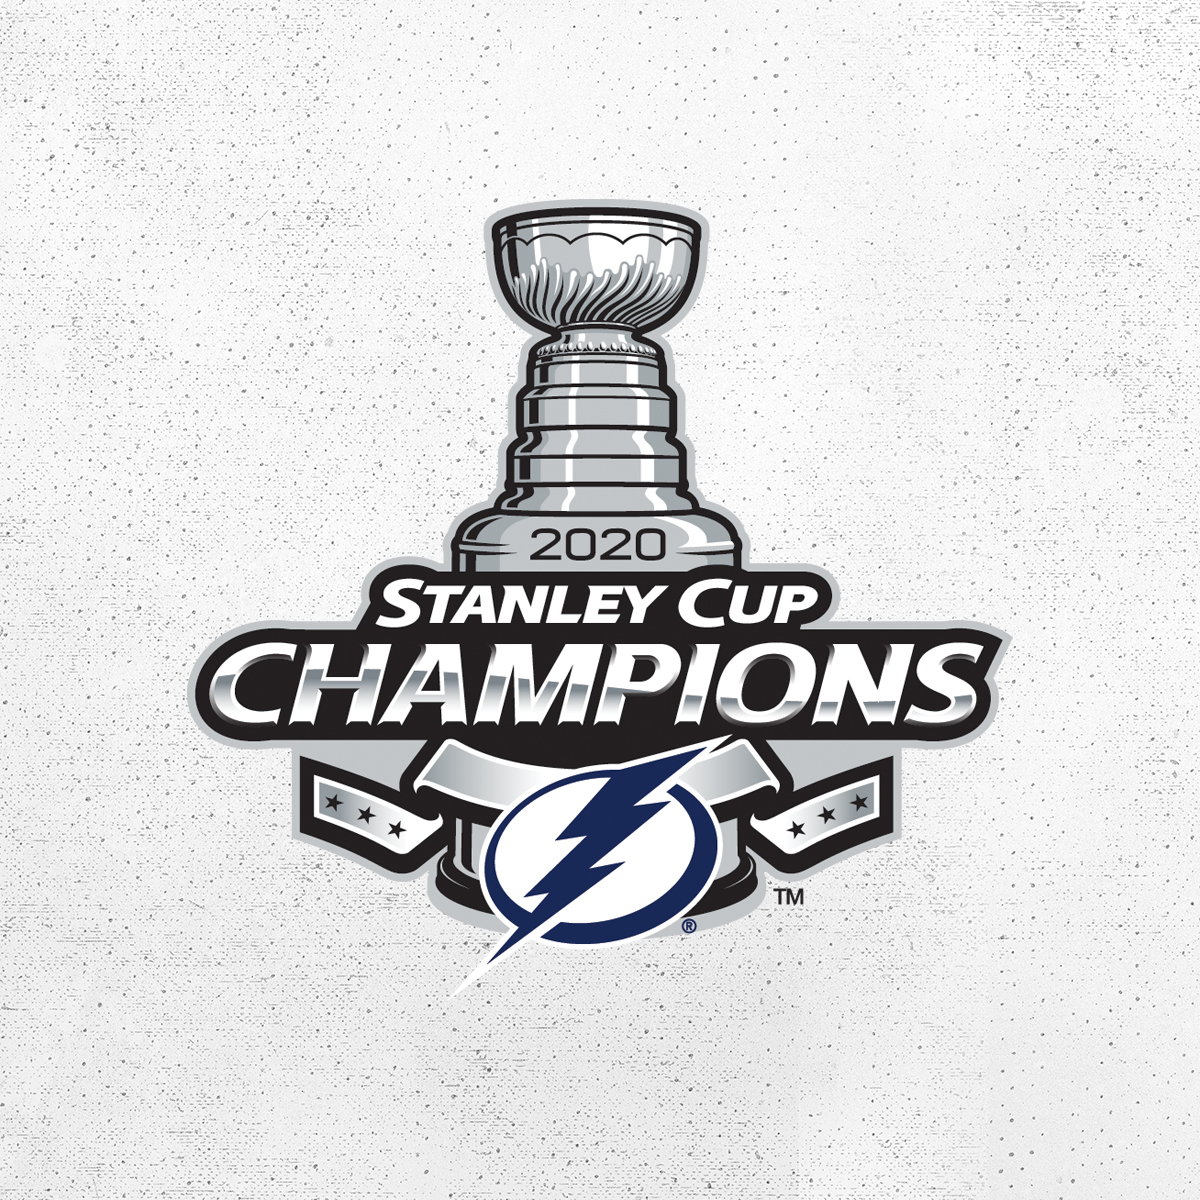 YOU’RE NOT DREAMING!!!!!

#GOBOLTS